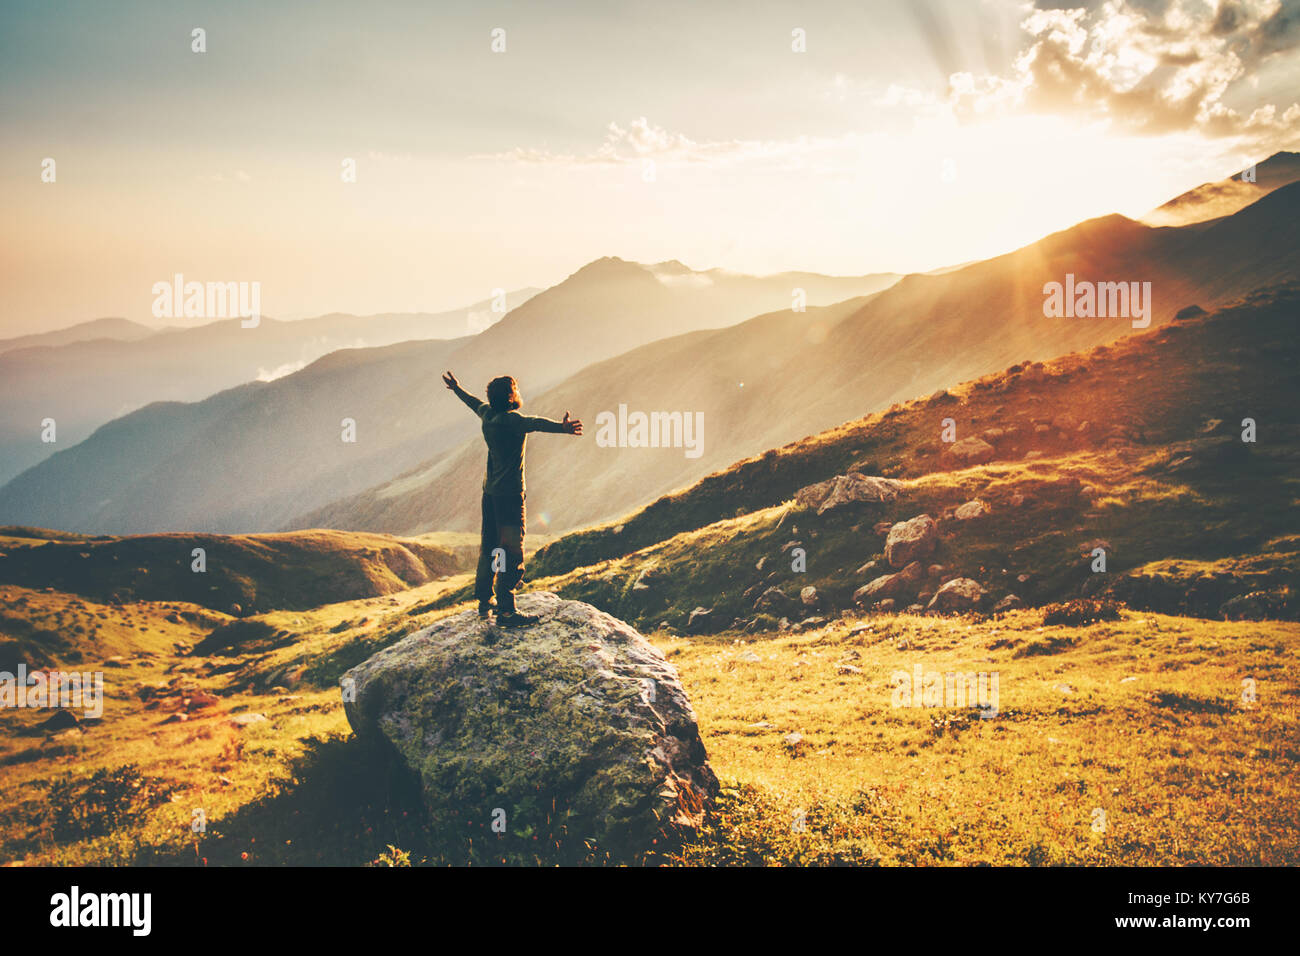 Man raised hands at sunset mountains Travel Lifestyle success and wellness emotional concept adventure vacations outdoor hiking harmony with nature ae Stock Photo